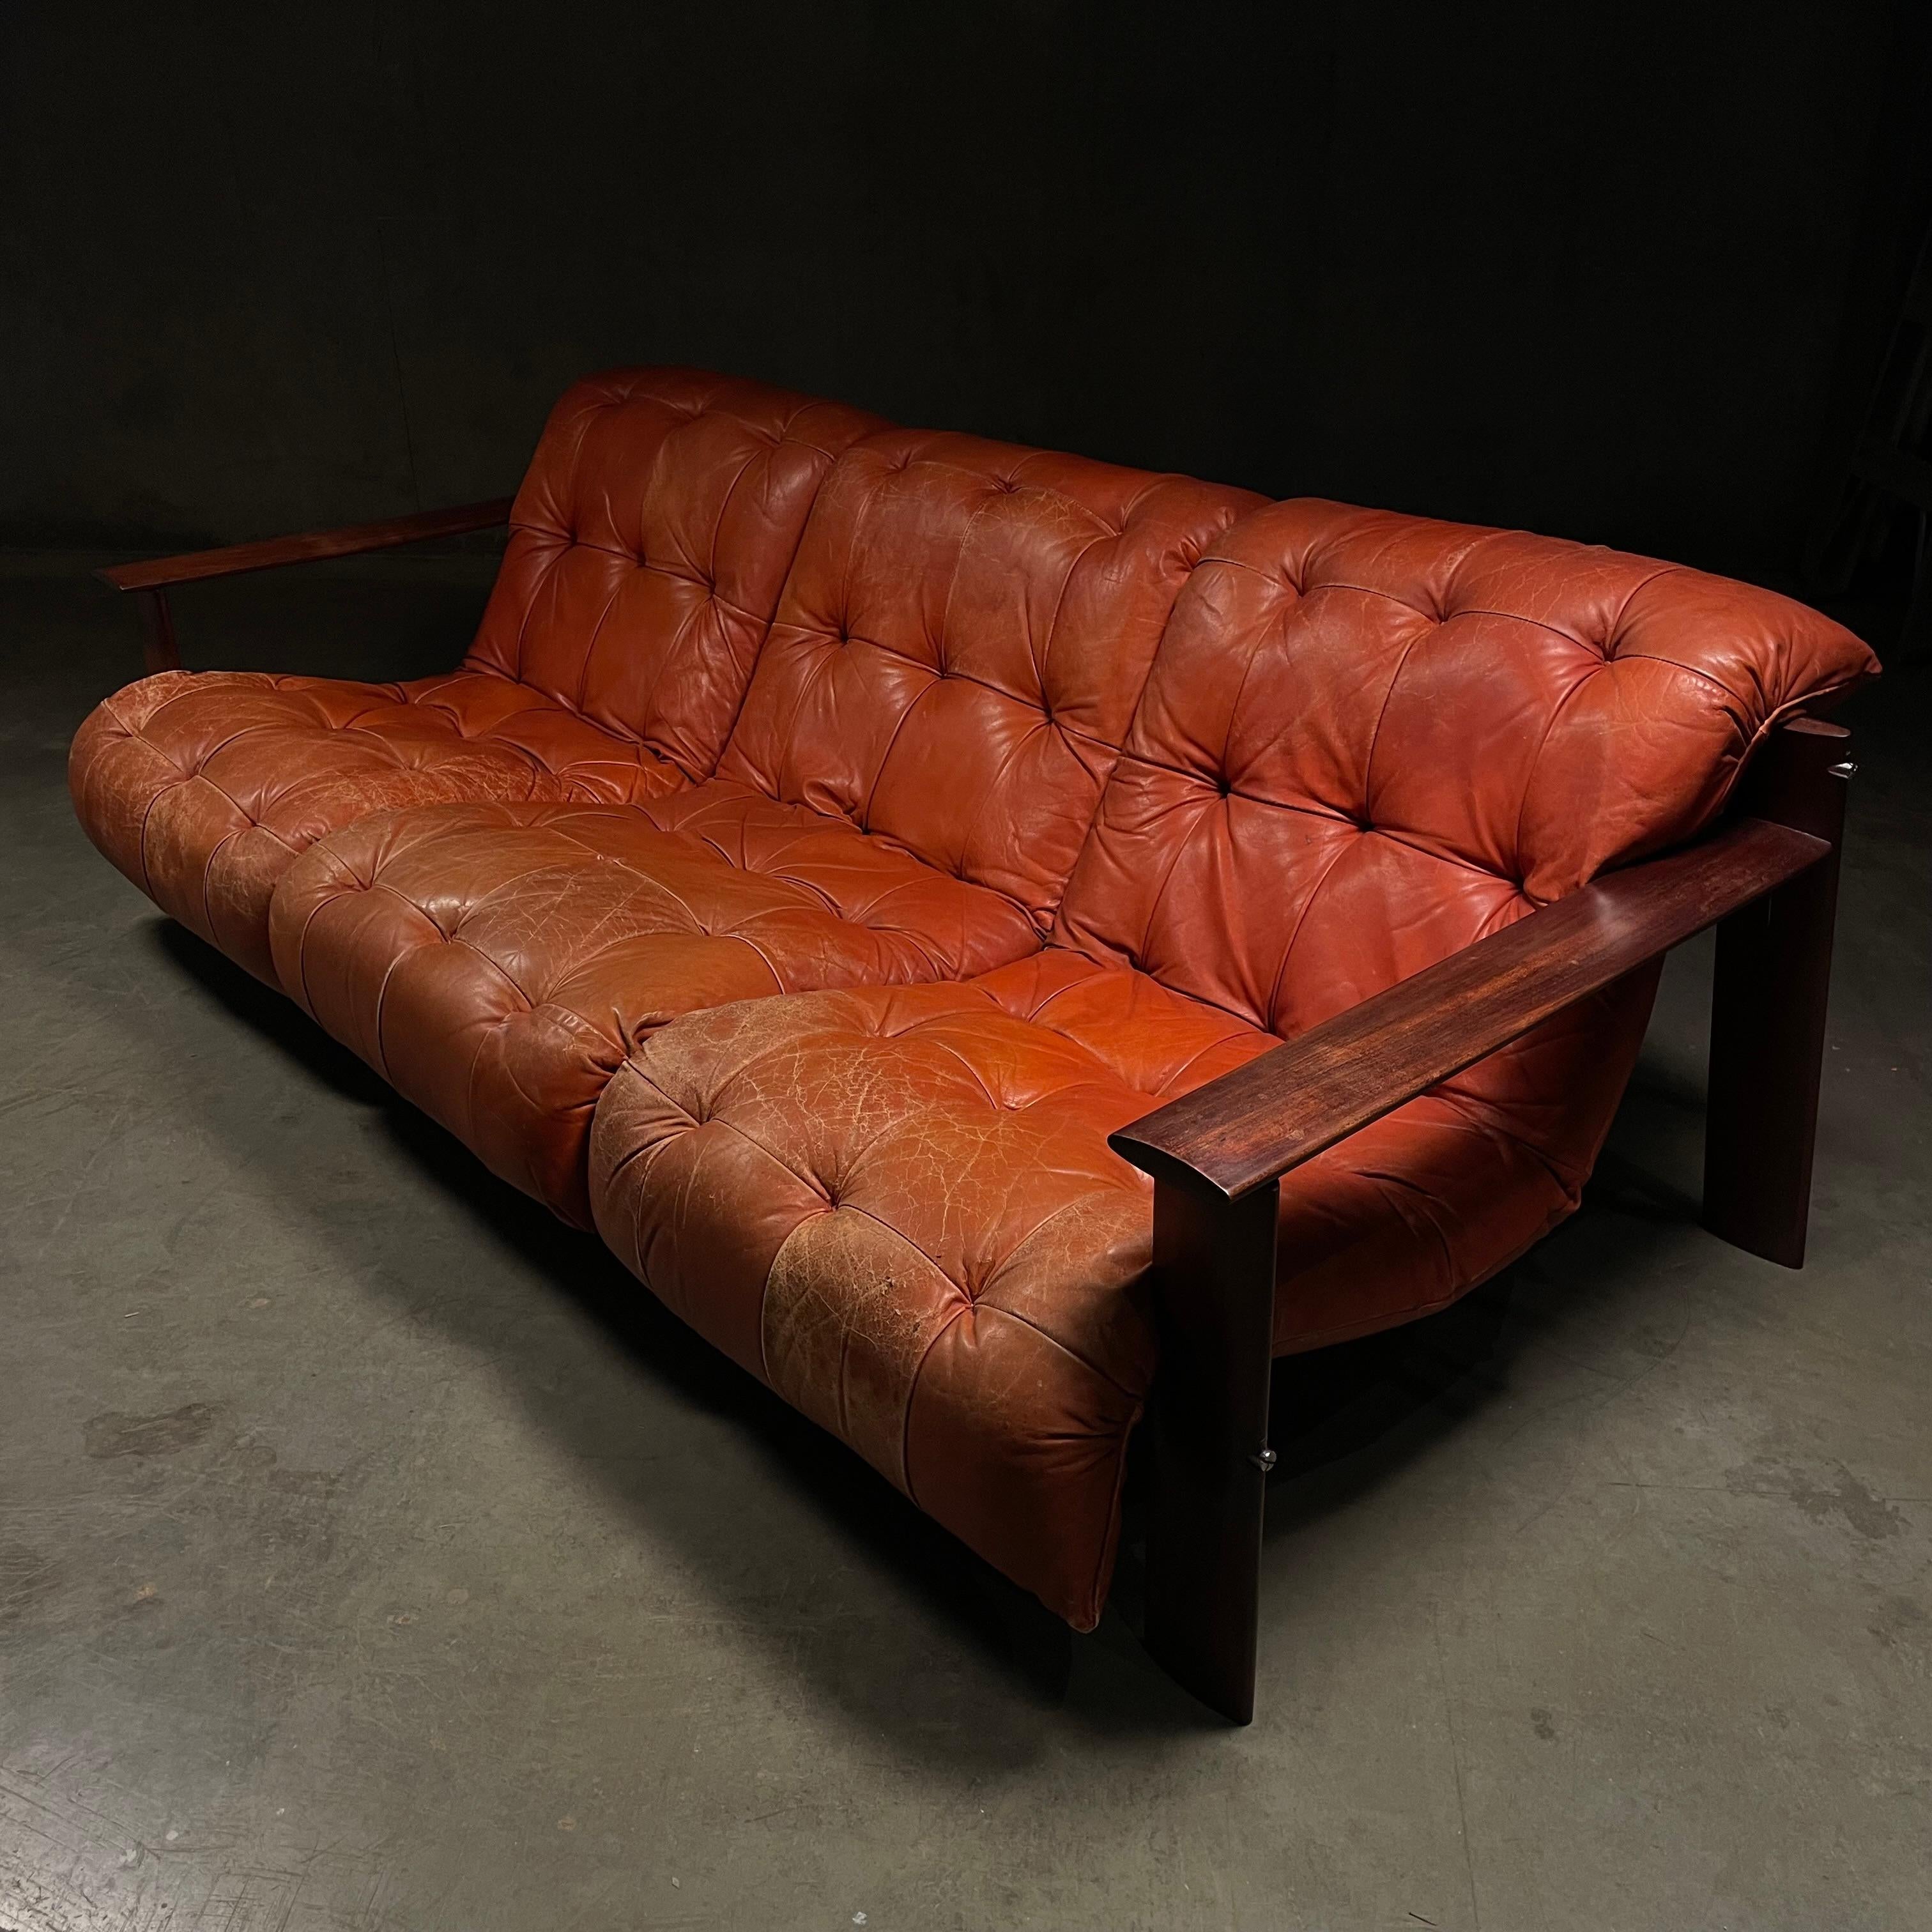 Very nicely shaped lounge sofa designed and manufactured by Percival Lafer, Brazil, 1970. This sofa has a solid rosewood wooden frame and leather upholstery, chrome connections and leather straps support the seating cushion. The cushion is made of